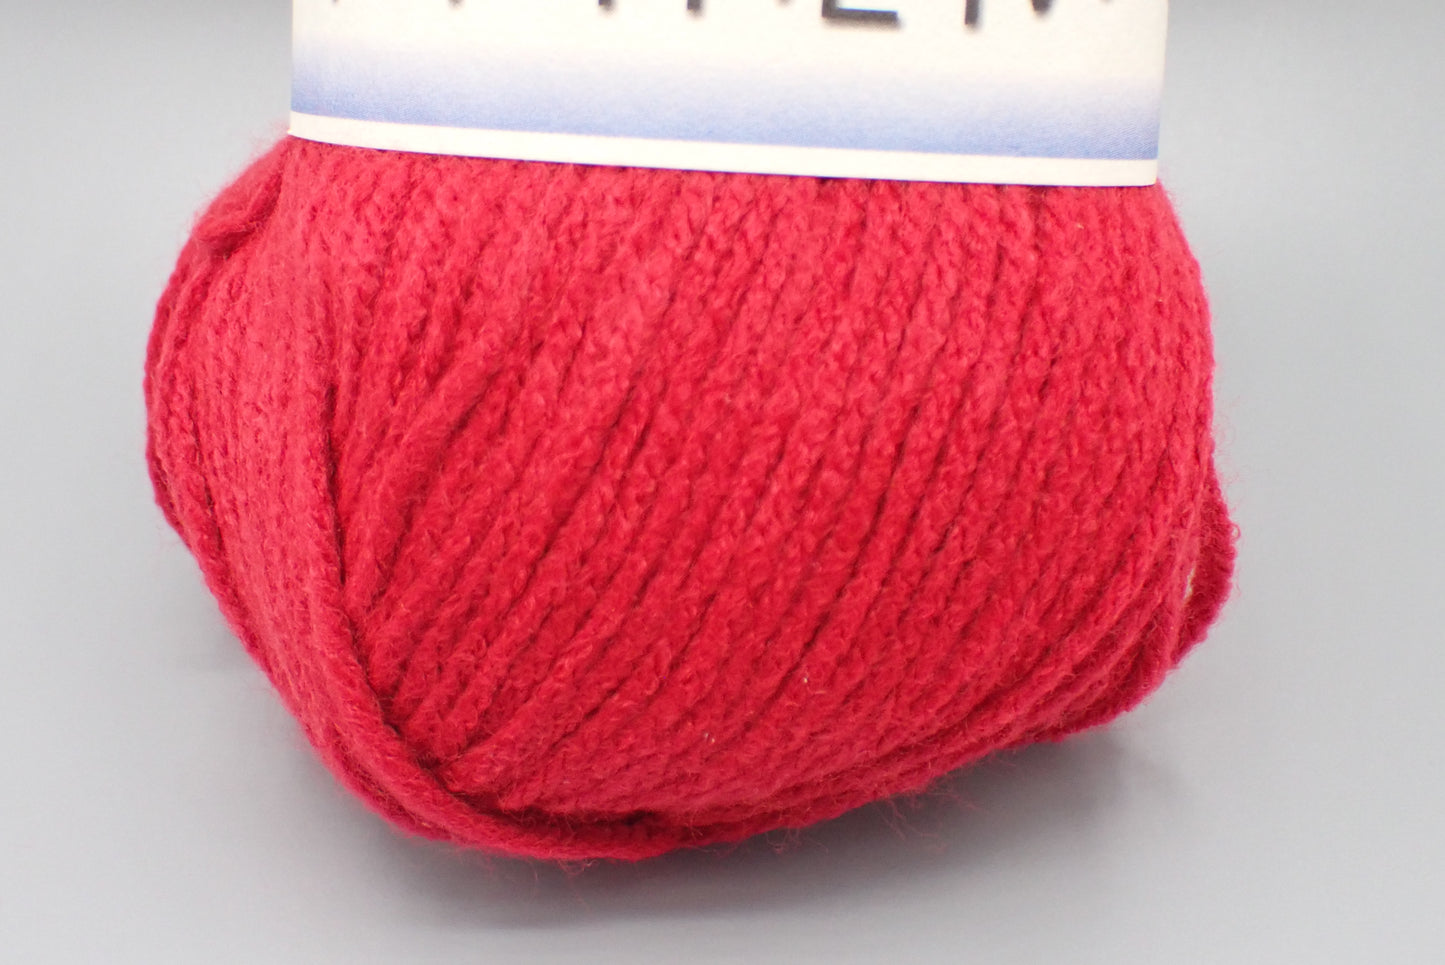 Cascade Yarns Anthem Worsted weight Red